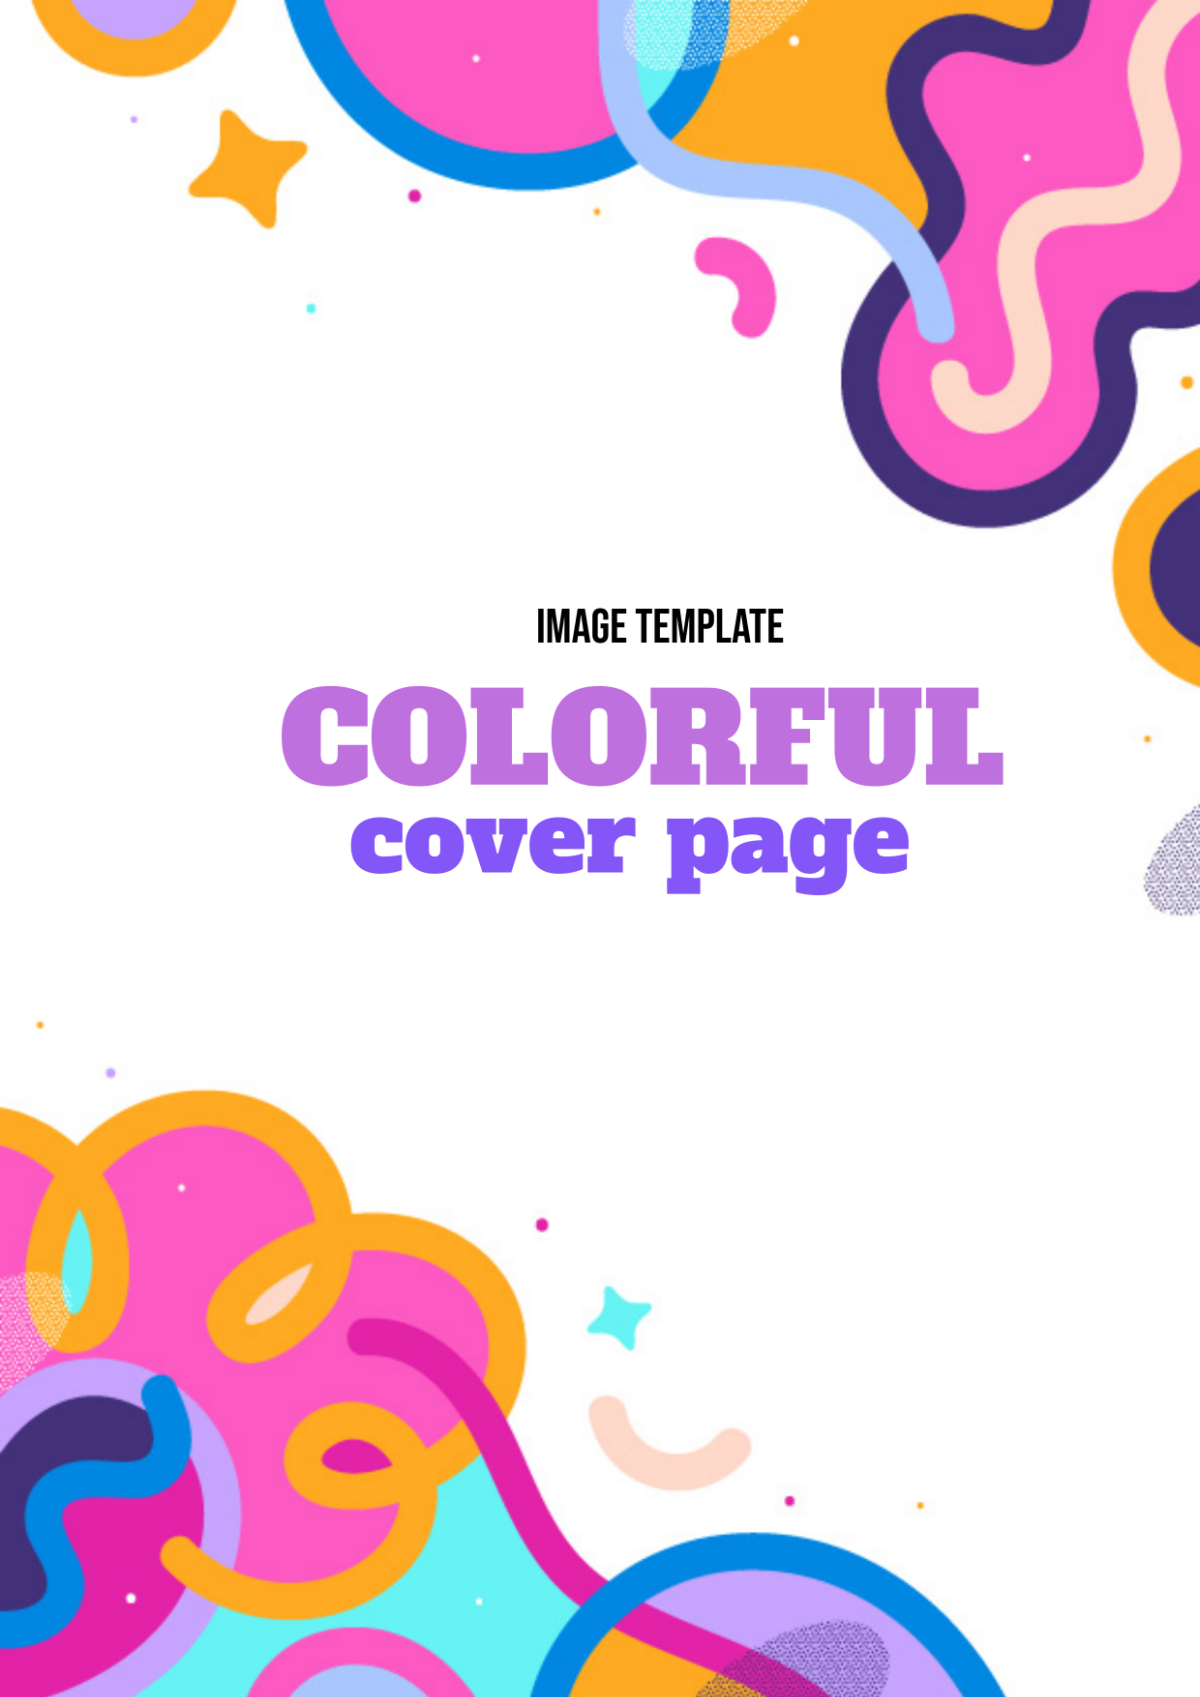 Colorful Cover Page Image Template